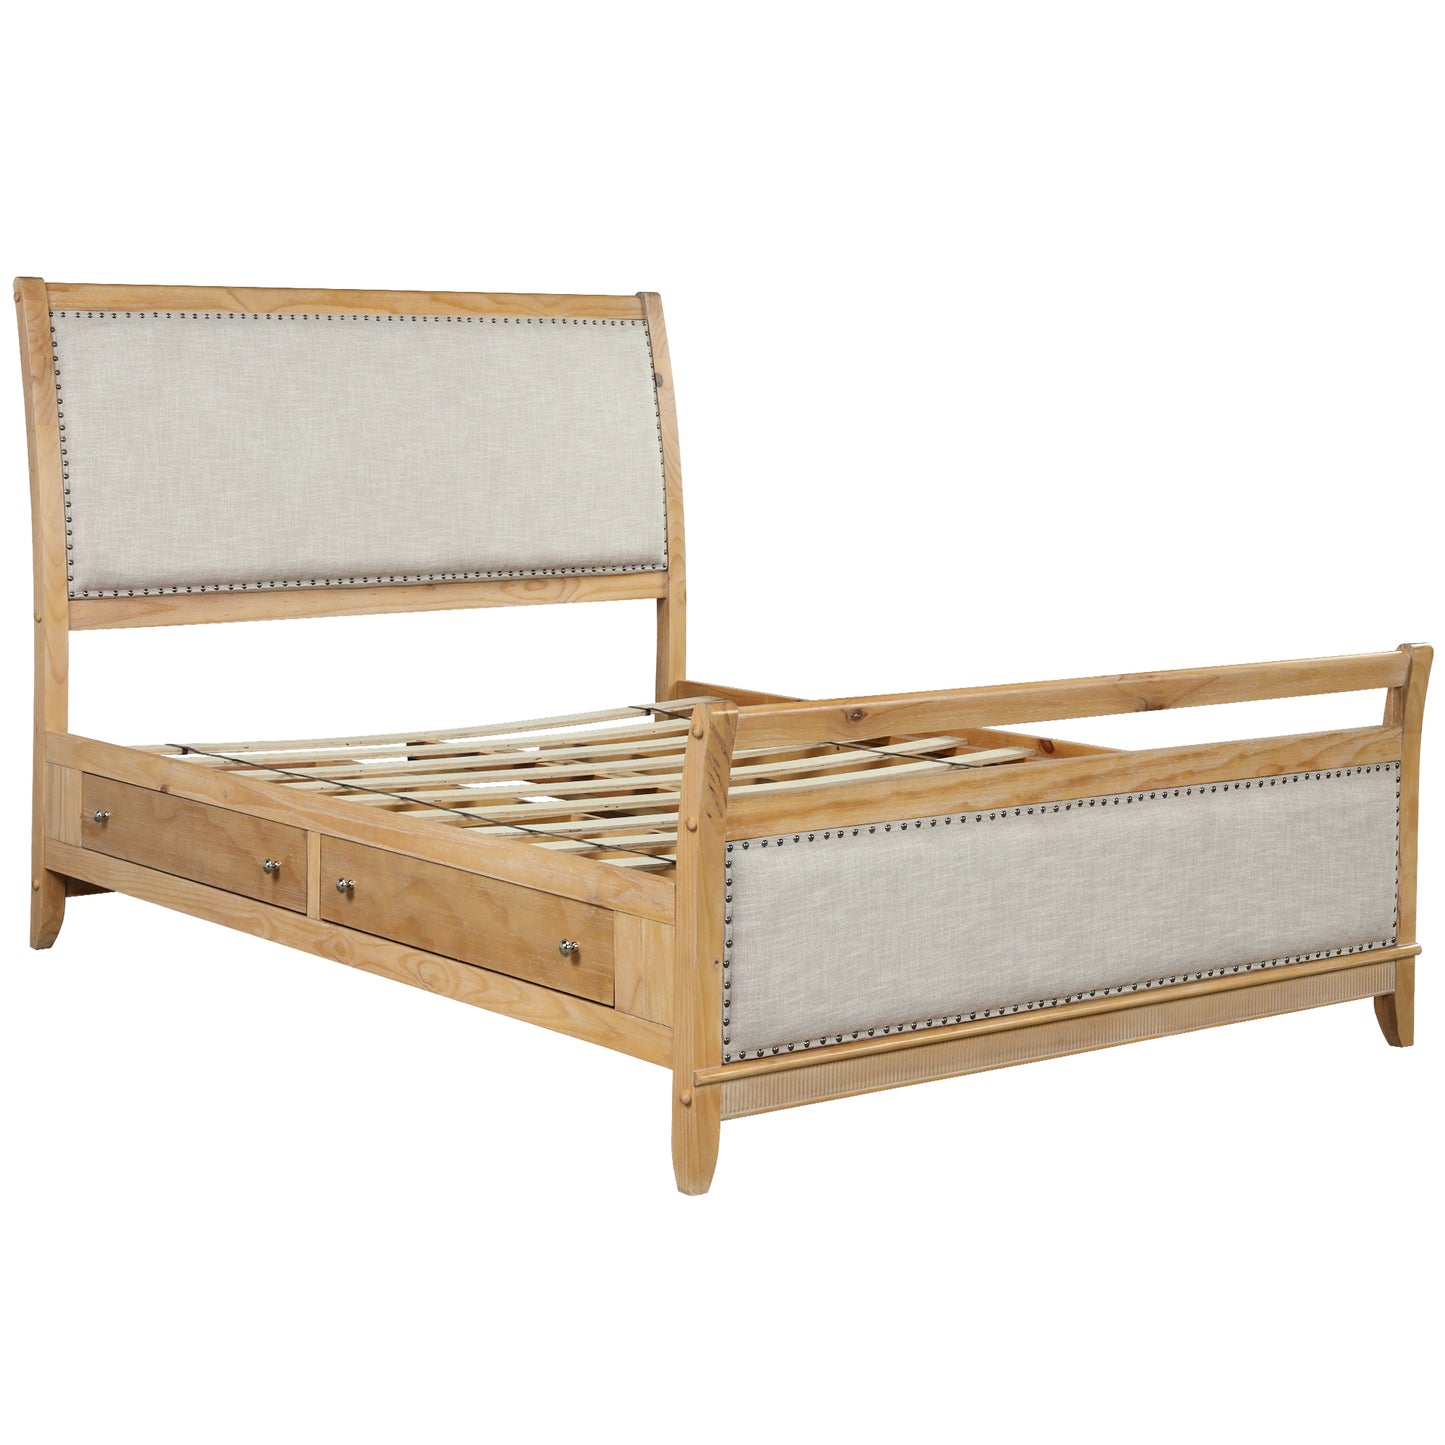 Hazel Upholstered and Wood Storage Queen Bed with 4 drawers